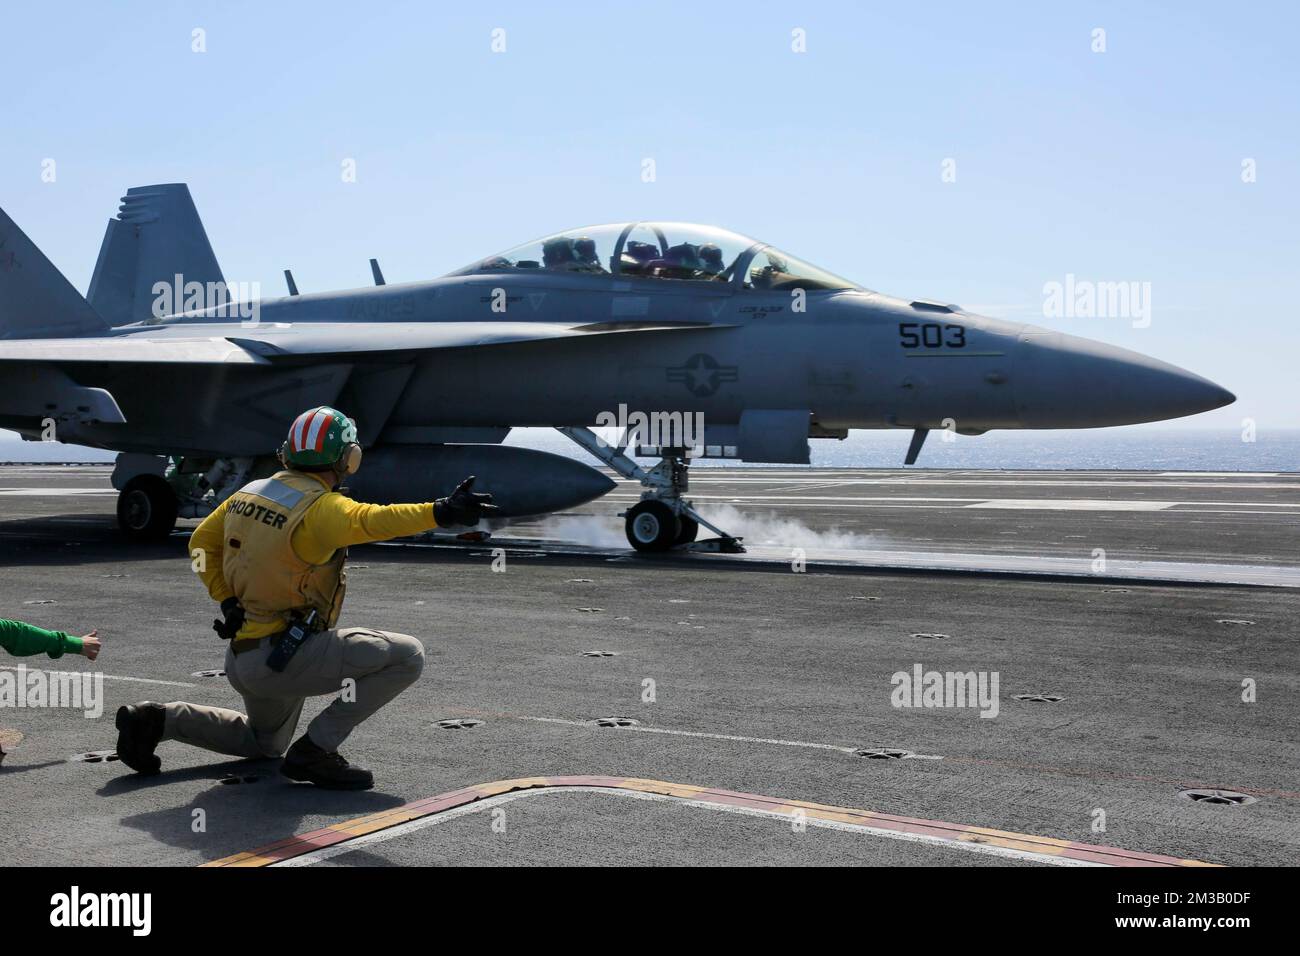 PACIFIC OCEAN (Sept. 24, 2022) Lt. Cmdr. Ryan Mills, from Augusta, Ga., signals an EA-18G Growler, assigned to the “Vikings” of Electronic Attack Squadron (VAQ) 129, as it launches from the flight deck of the Nimitz-class aircraft carrier USS Abraham Lincoln (CVN 72). Abraham Lincoln is underway conducting routine operations in U.S. 3rd Fleet. (U.S. Navy photo by Mass Communication Specialist 3rd Class Madison Cassidy) Stock Photo